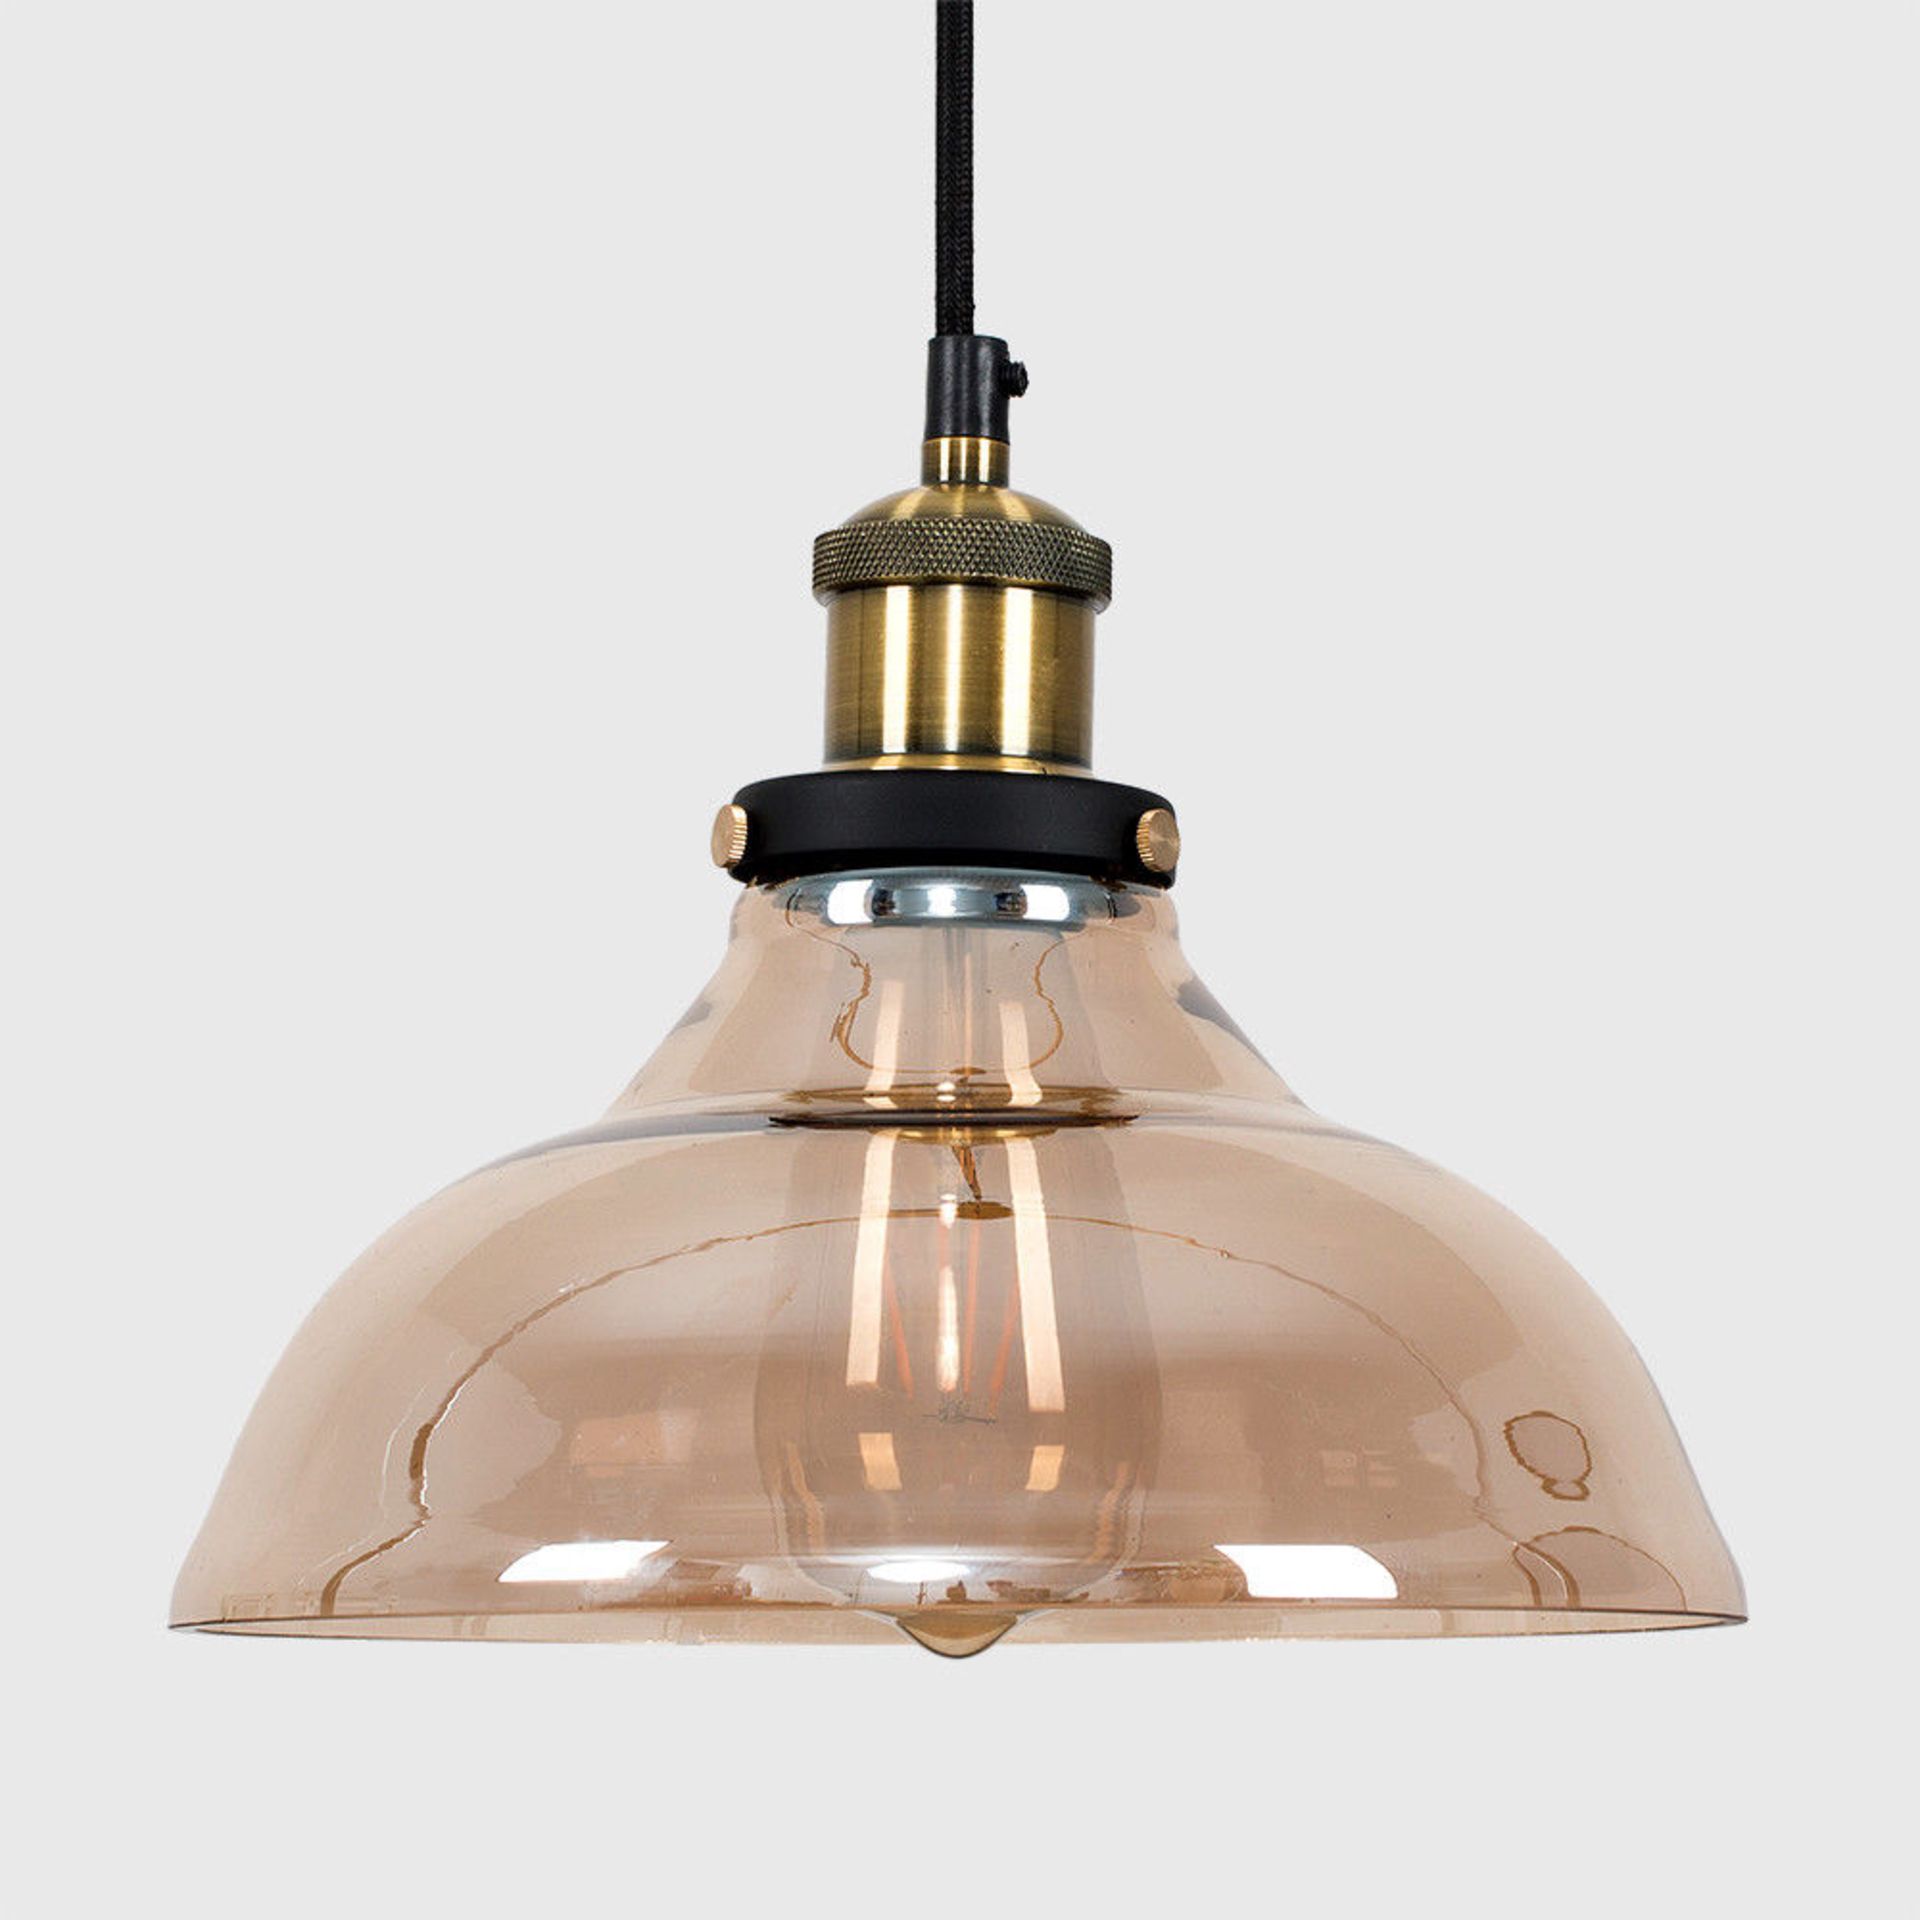 Amber Industrial Design Glass Ceiling Pendant This stunning pendant is constructed from metal and